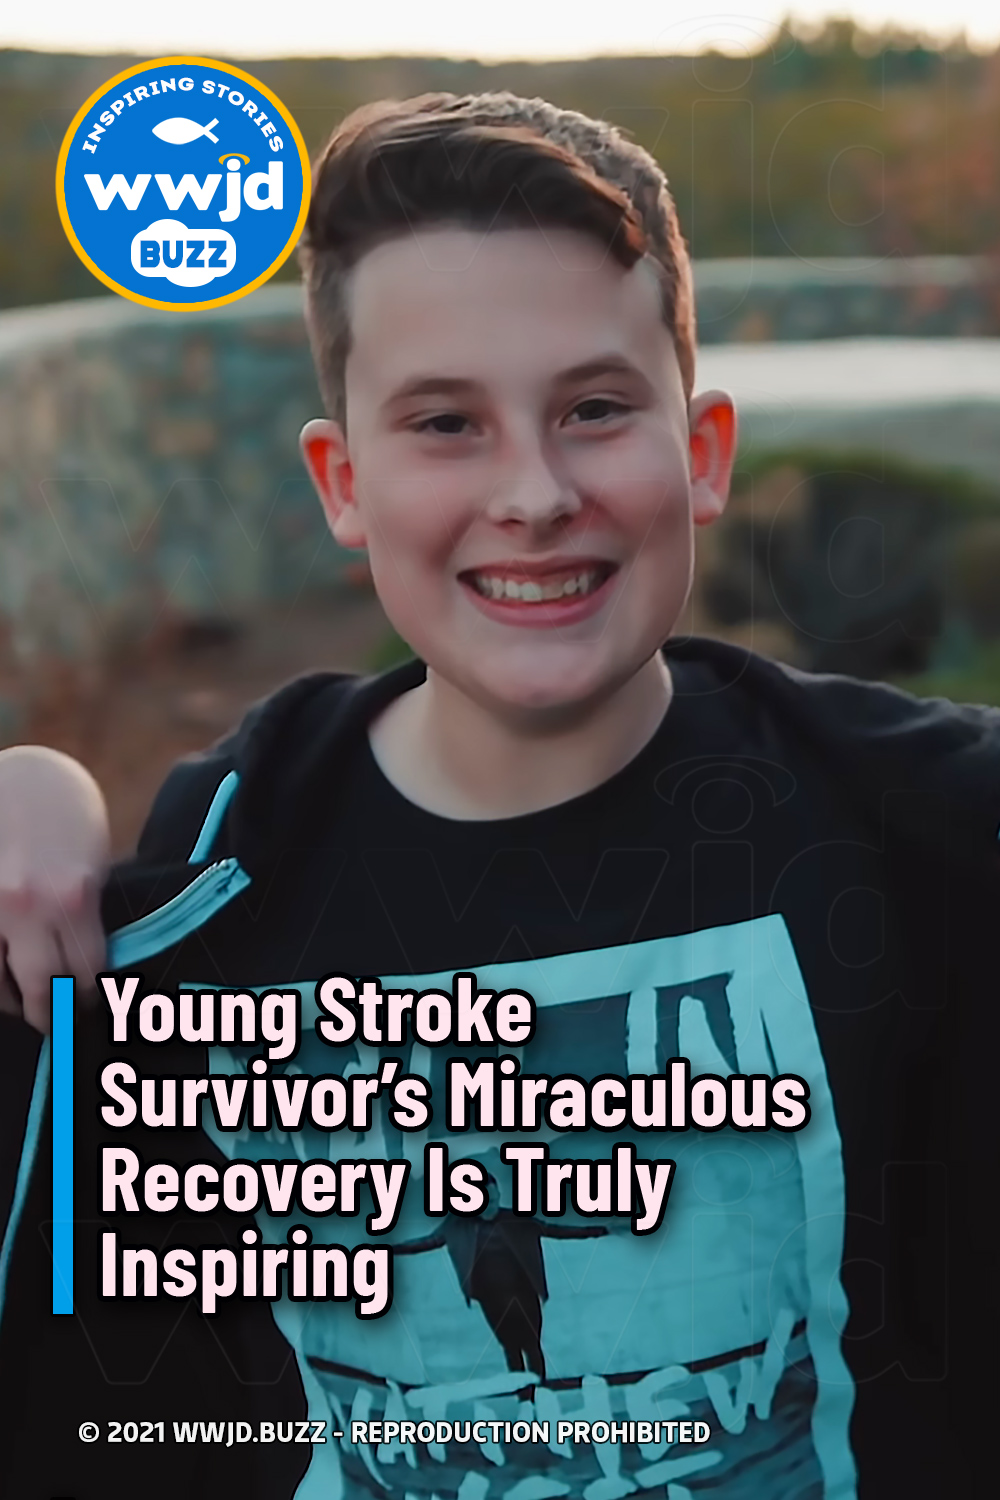 Young Stroke Survivor’s Miraculous Recovery Is Truly Inspiring